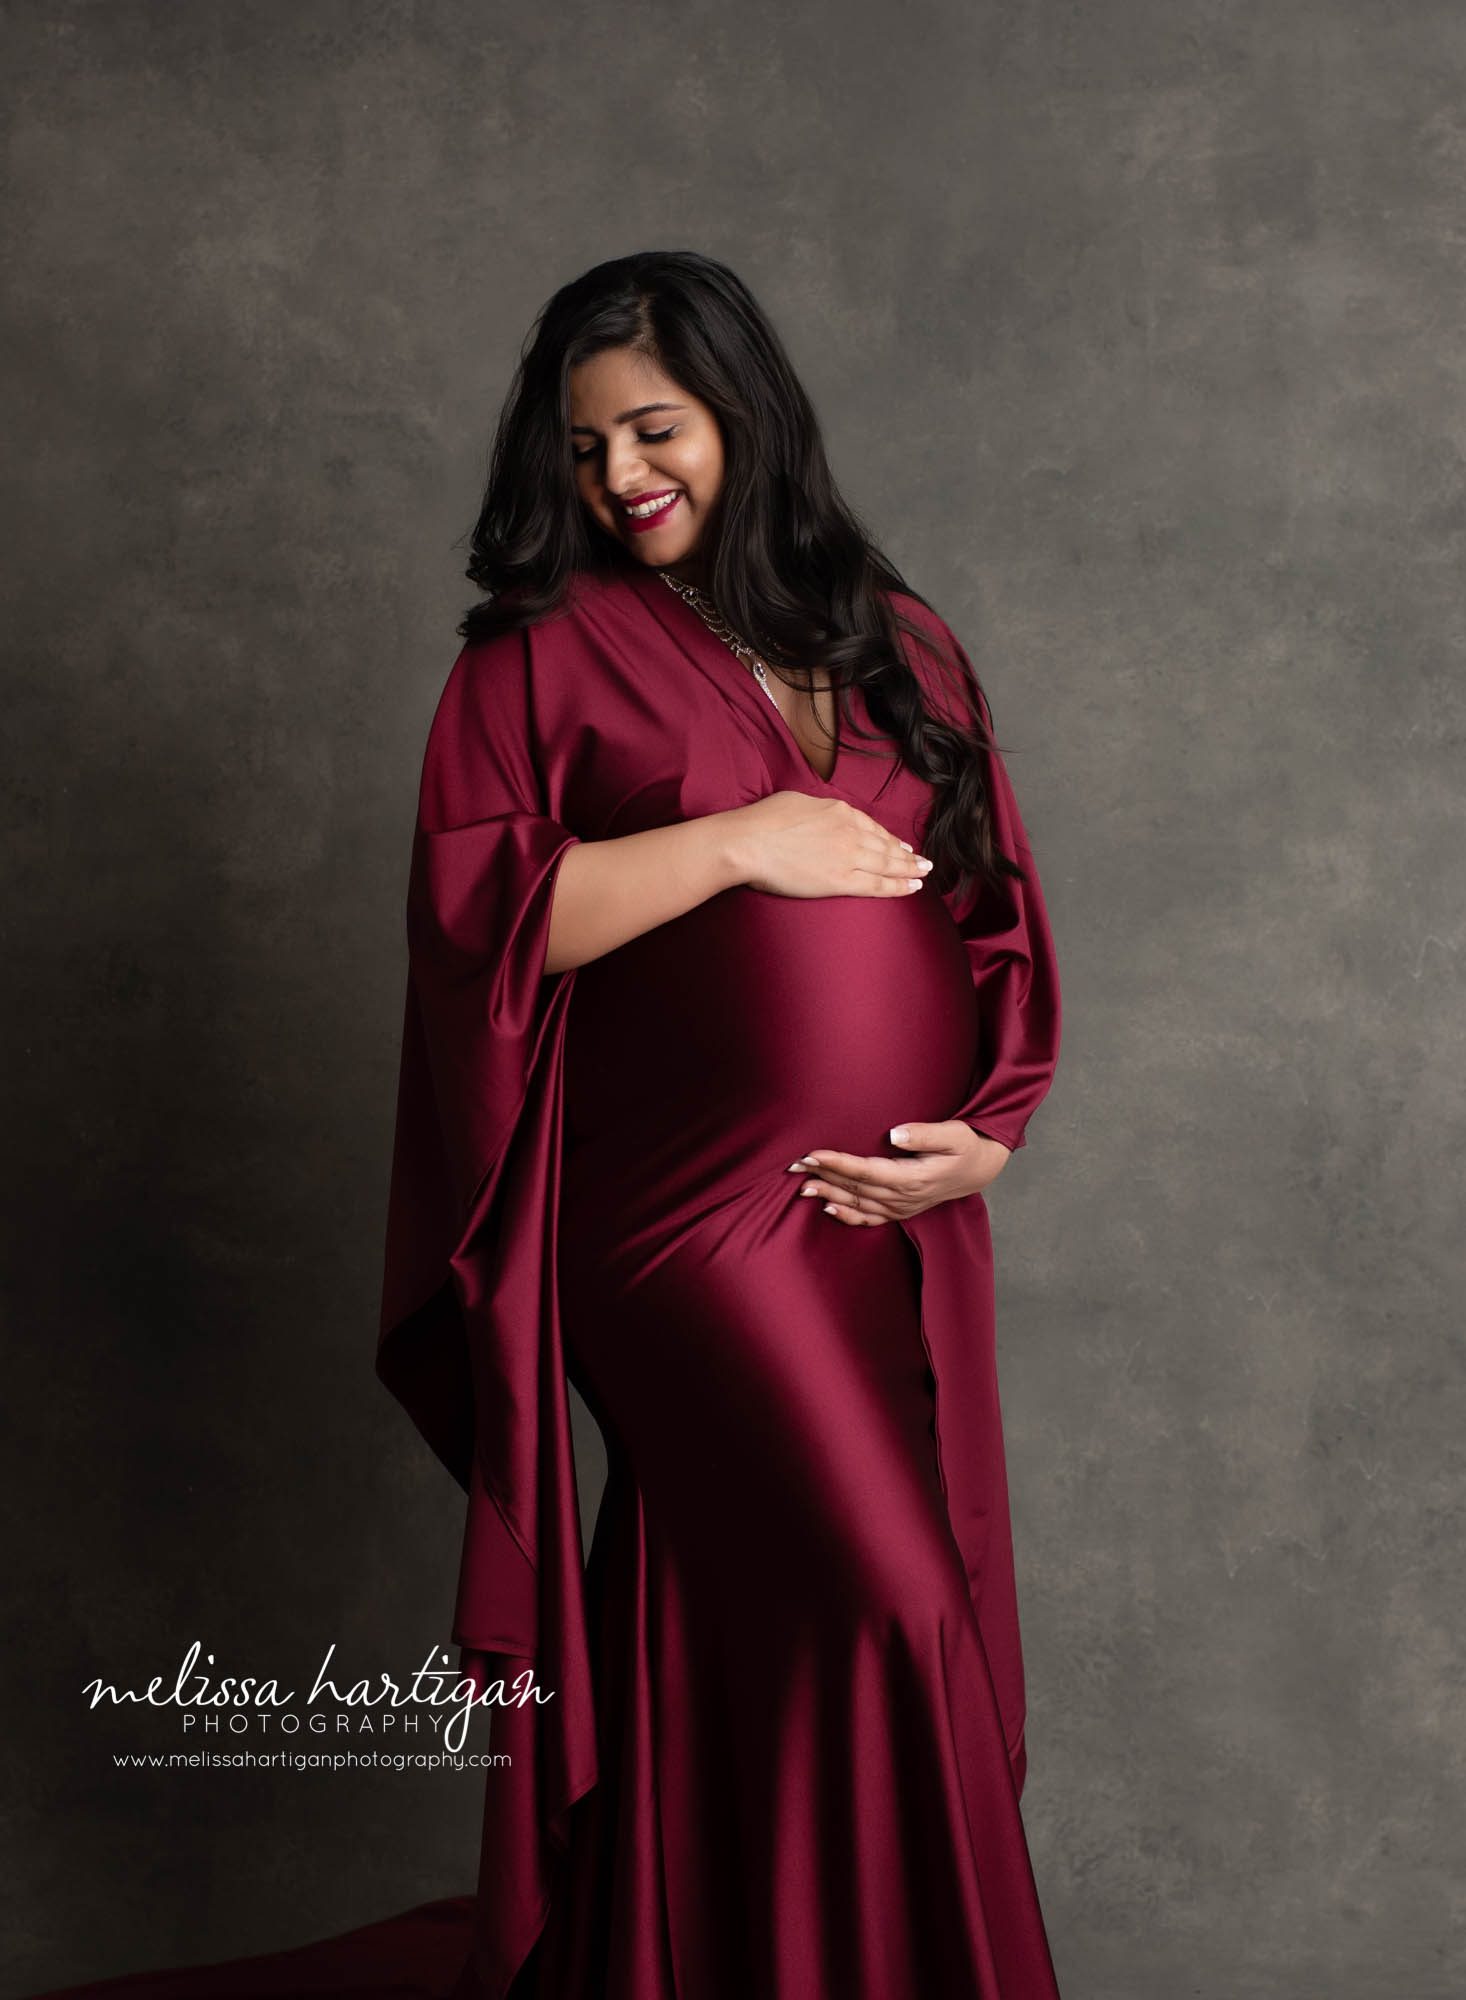 pregnancy studio picture mom happy holding baby bump maternity photographer manchester CT